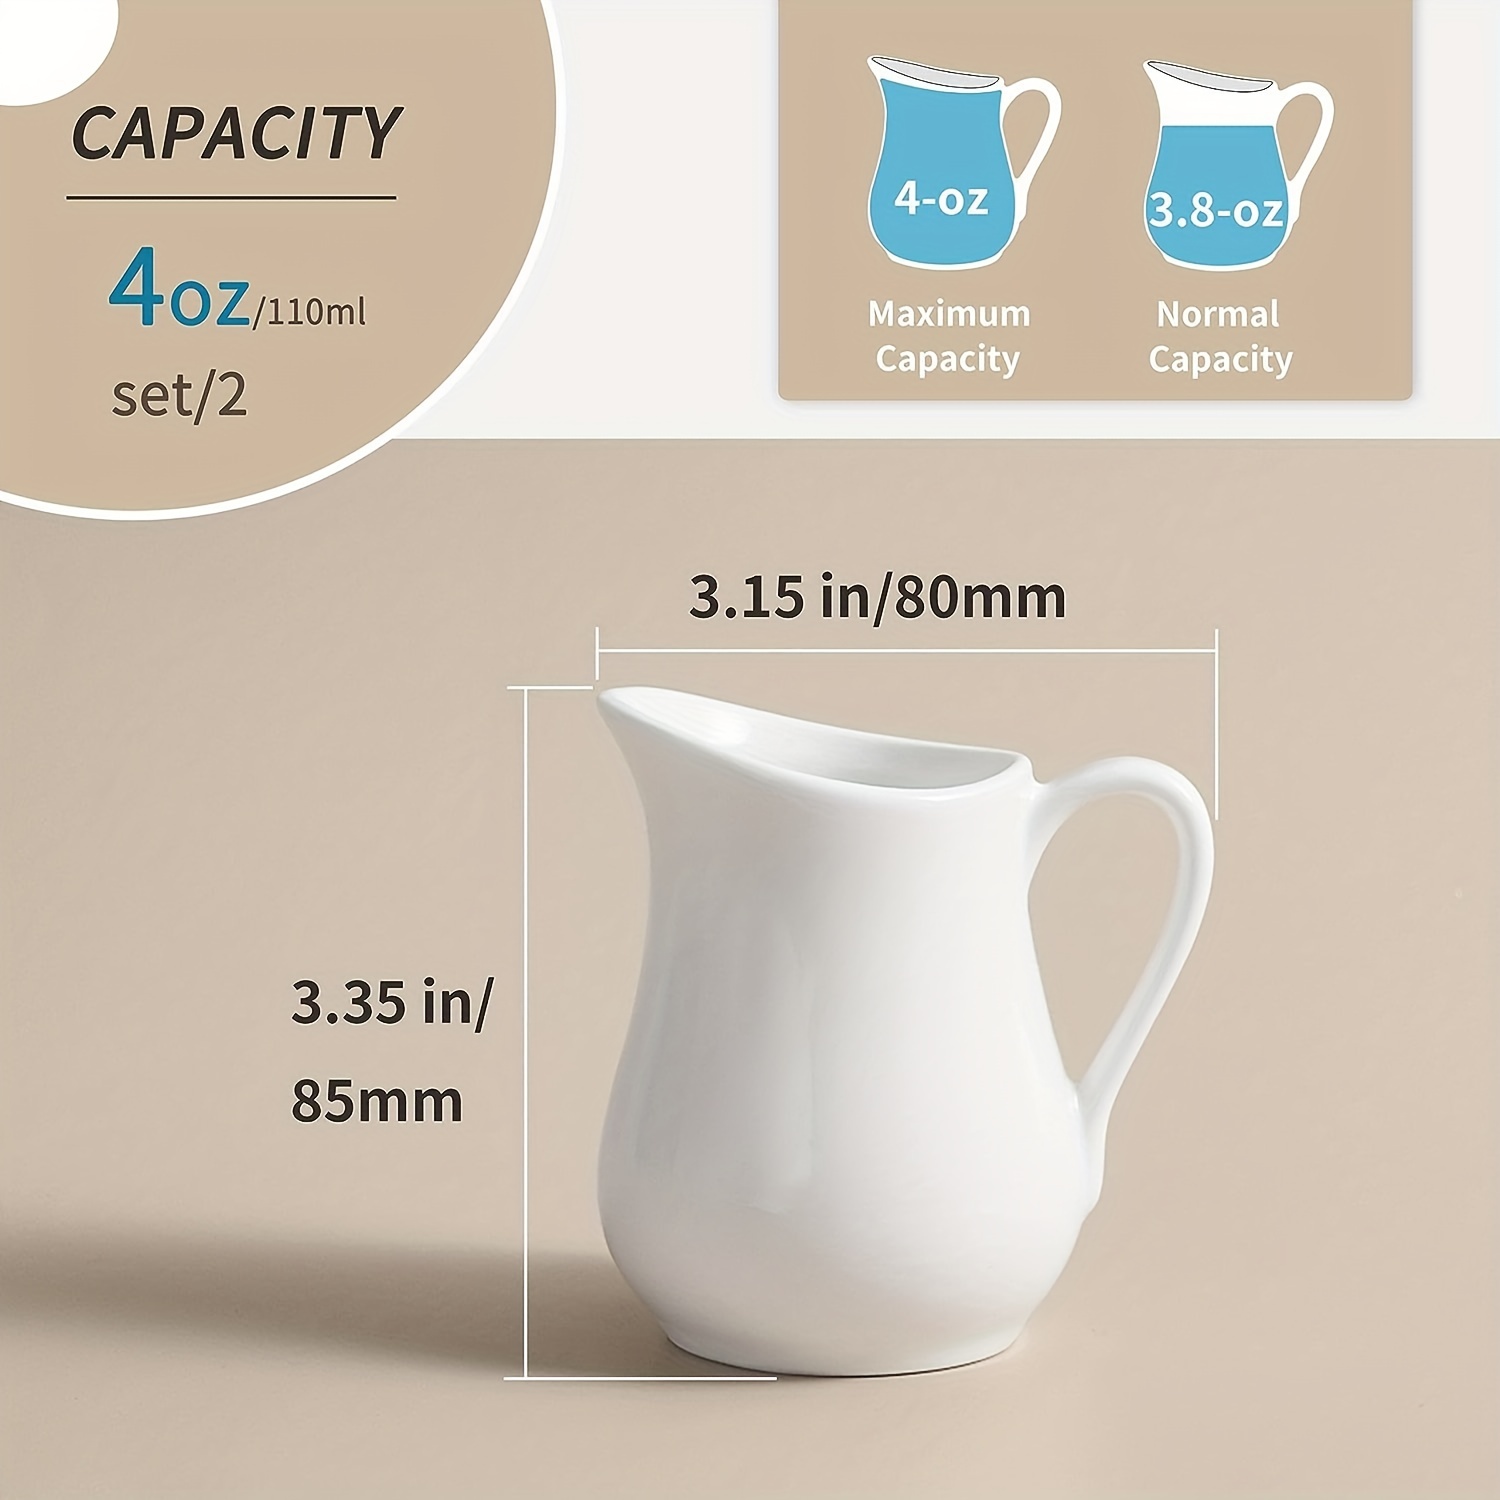 Leefasy milk, Mini Creamer Pitcher, with Lid Storage Containers Ceramic  Cream Jugs, Porcelain Creamer with Handle, Sauces Salad Sugar